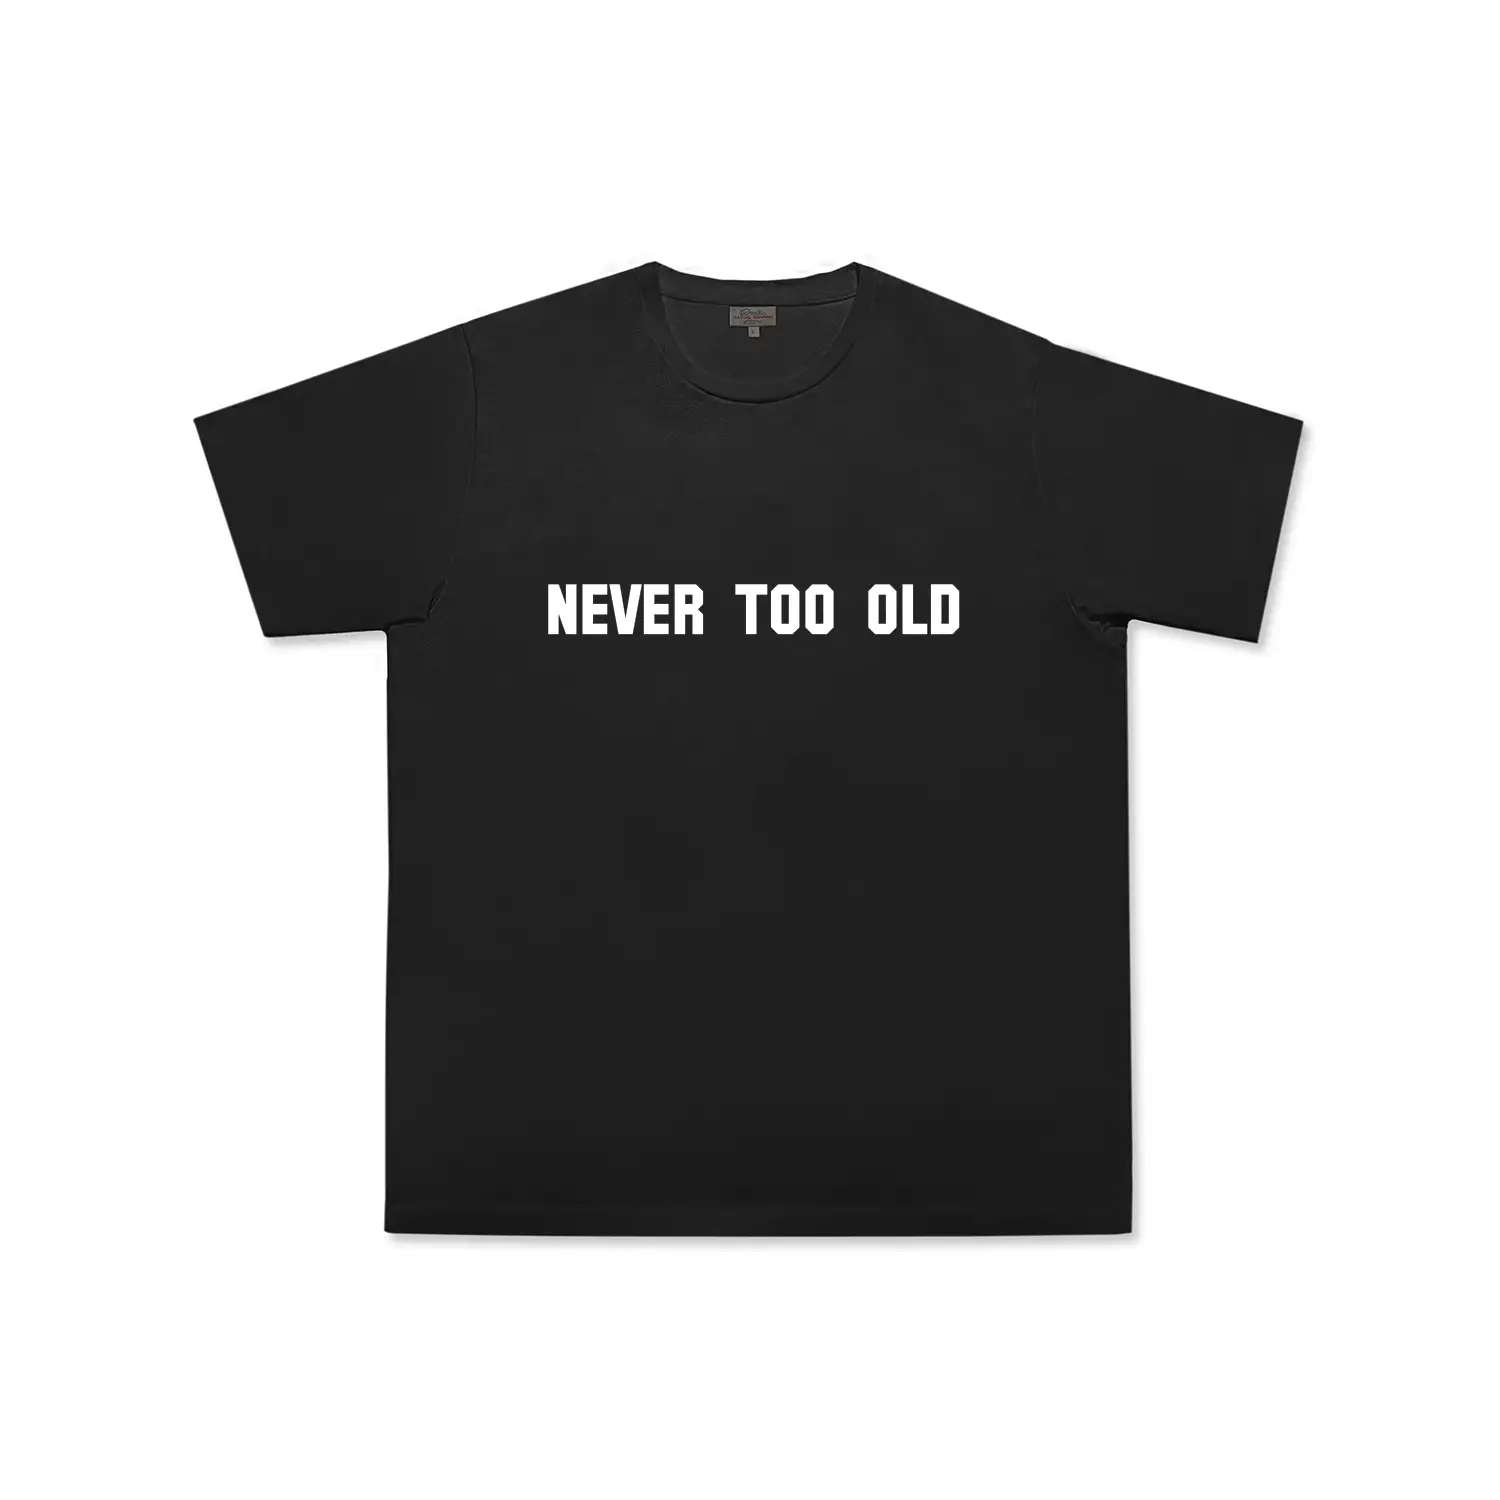 dmd.eu - NEVER TOO OLD DMD – T-shirt Never Too Old – front